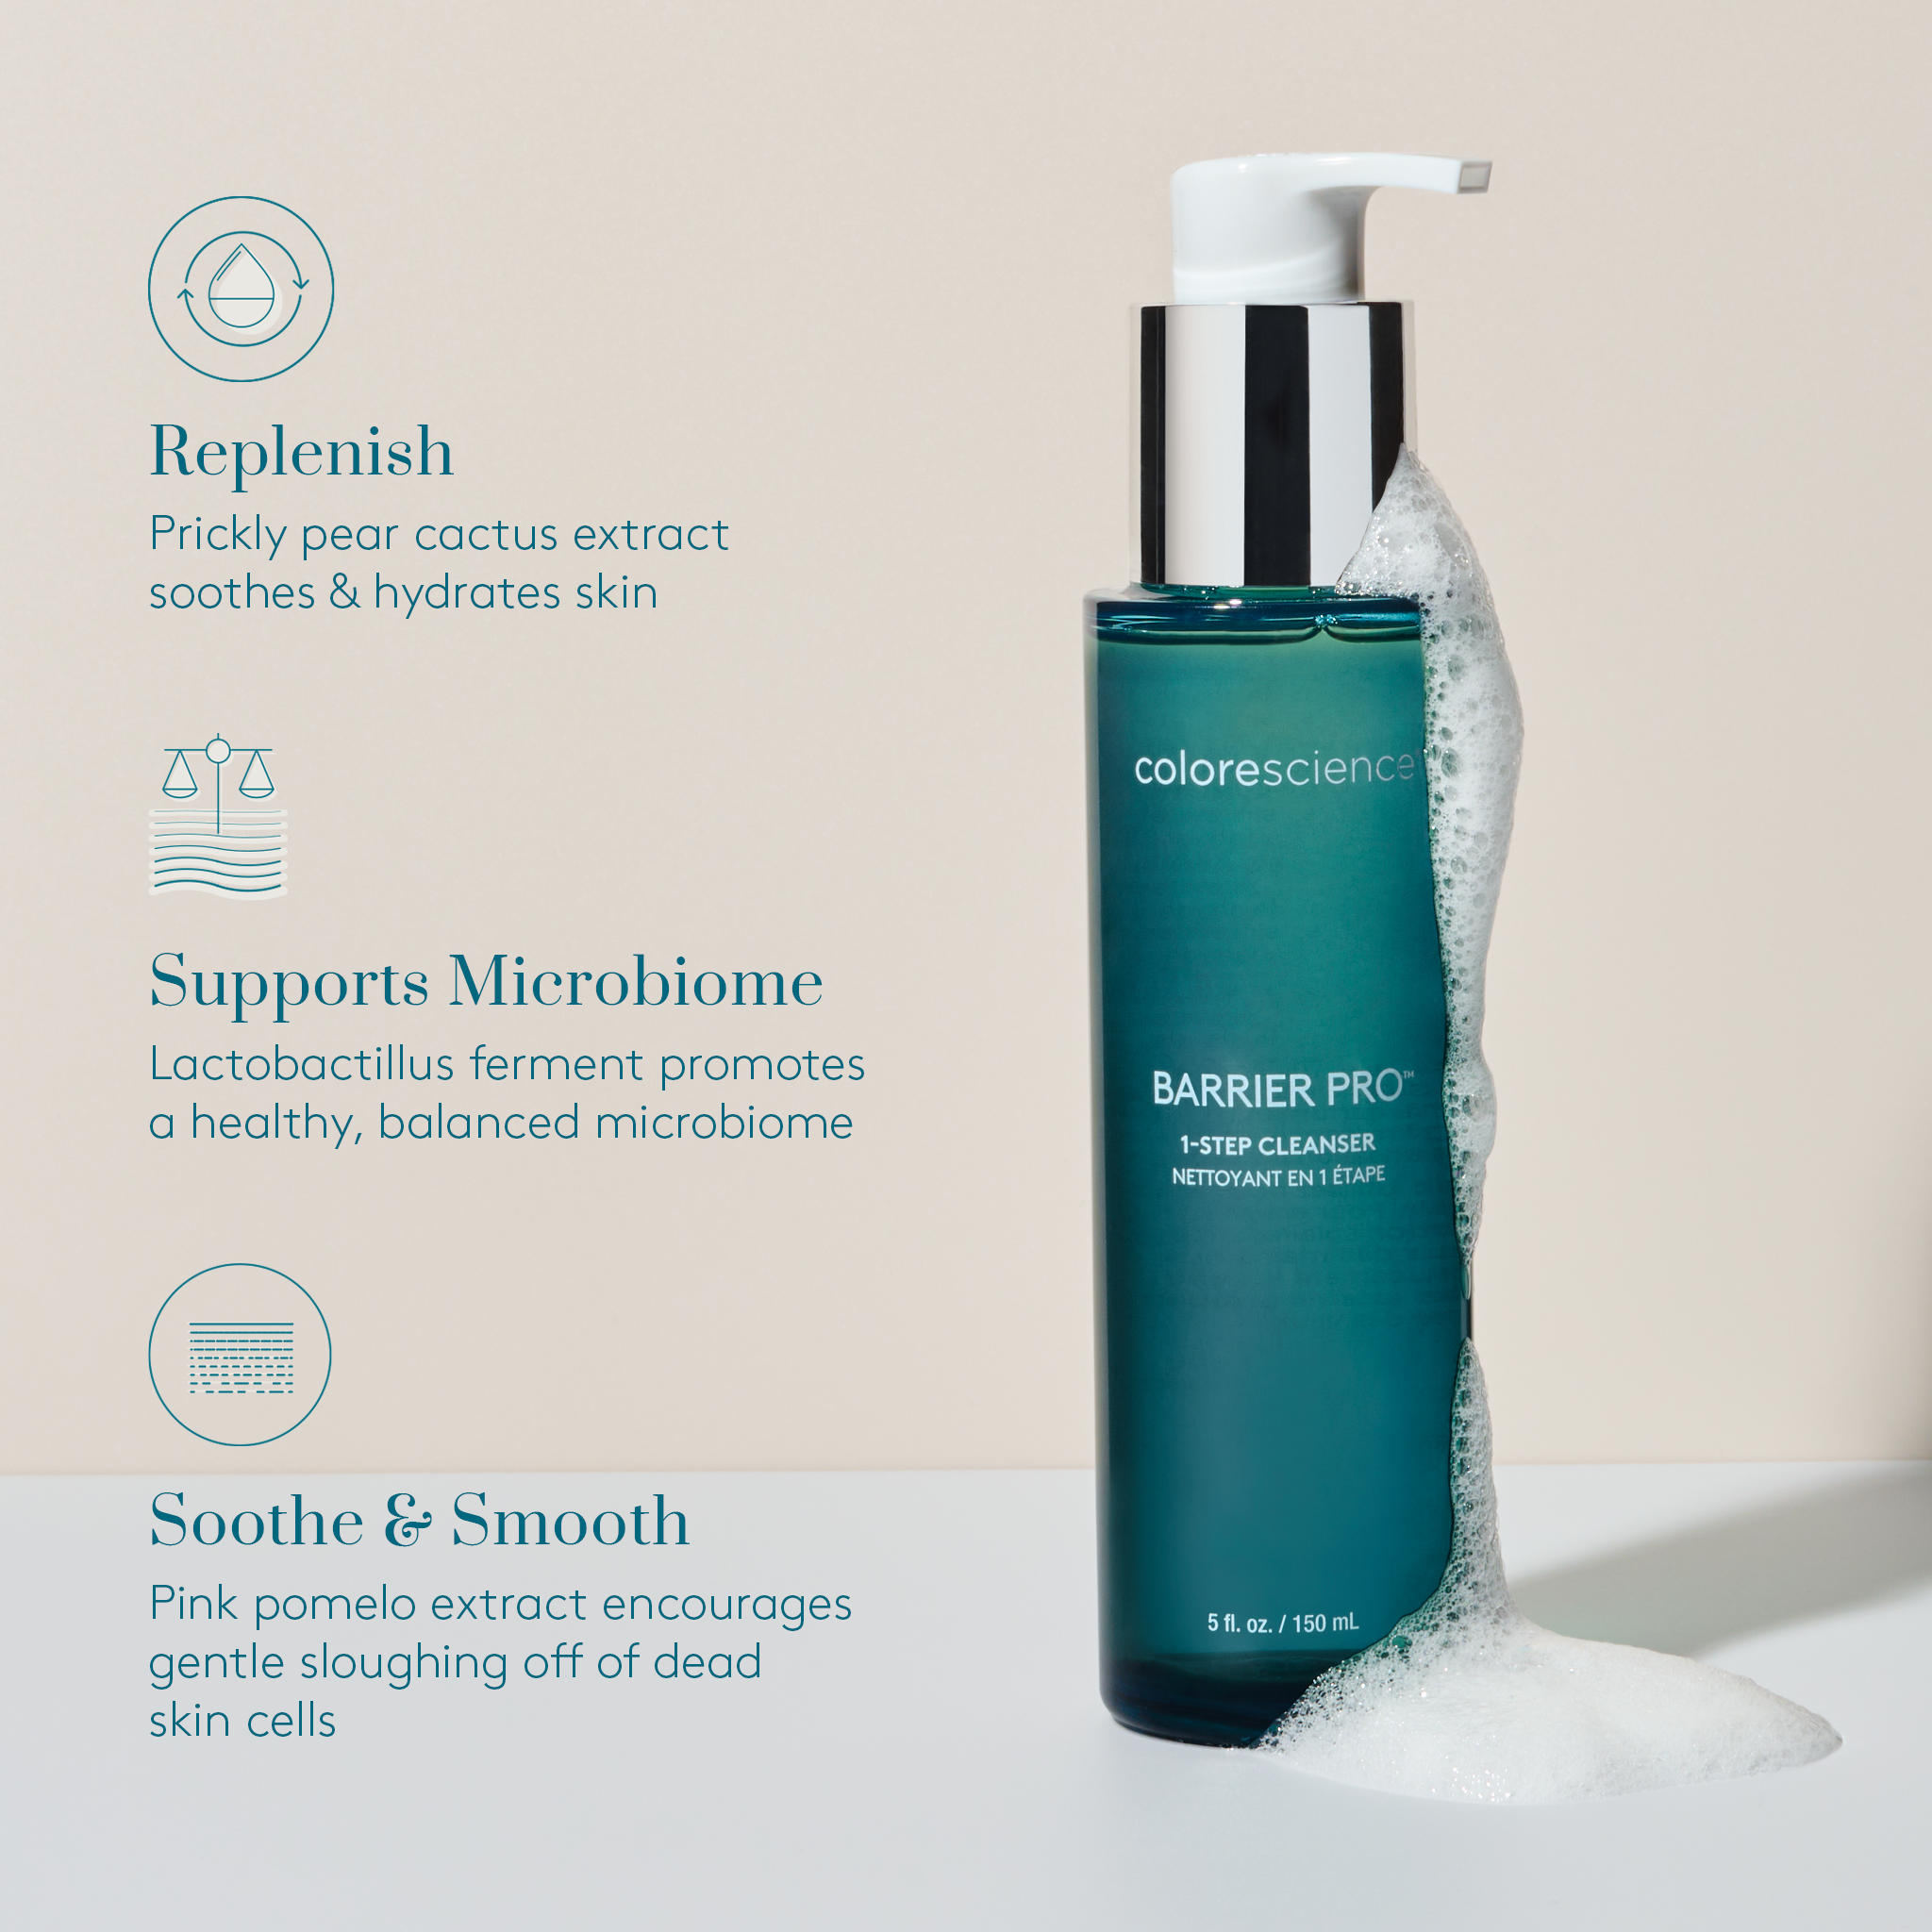 Barrier Pro™ 1-Step Cleanser: replenish - prickly pear cactus extract soothers & hydrates skin; supports microbiome - lactobacillus ferment promotes a healthy, balanced microbiome; soothe & smooth - pink pomelo extract encourages gentle sloughing off of dead skin cells || all